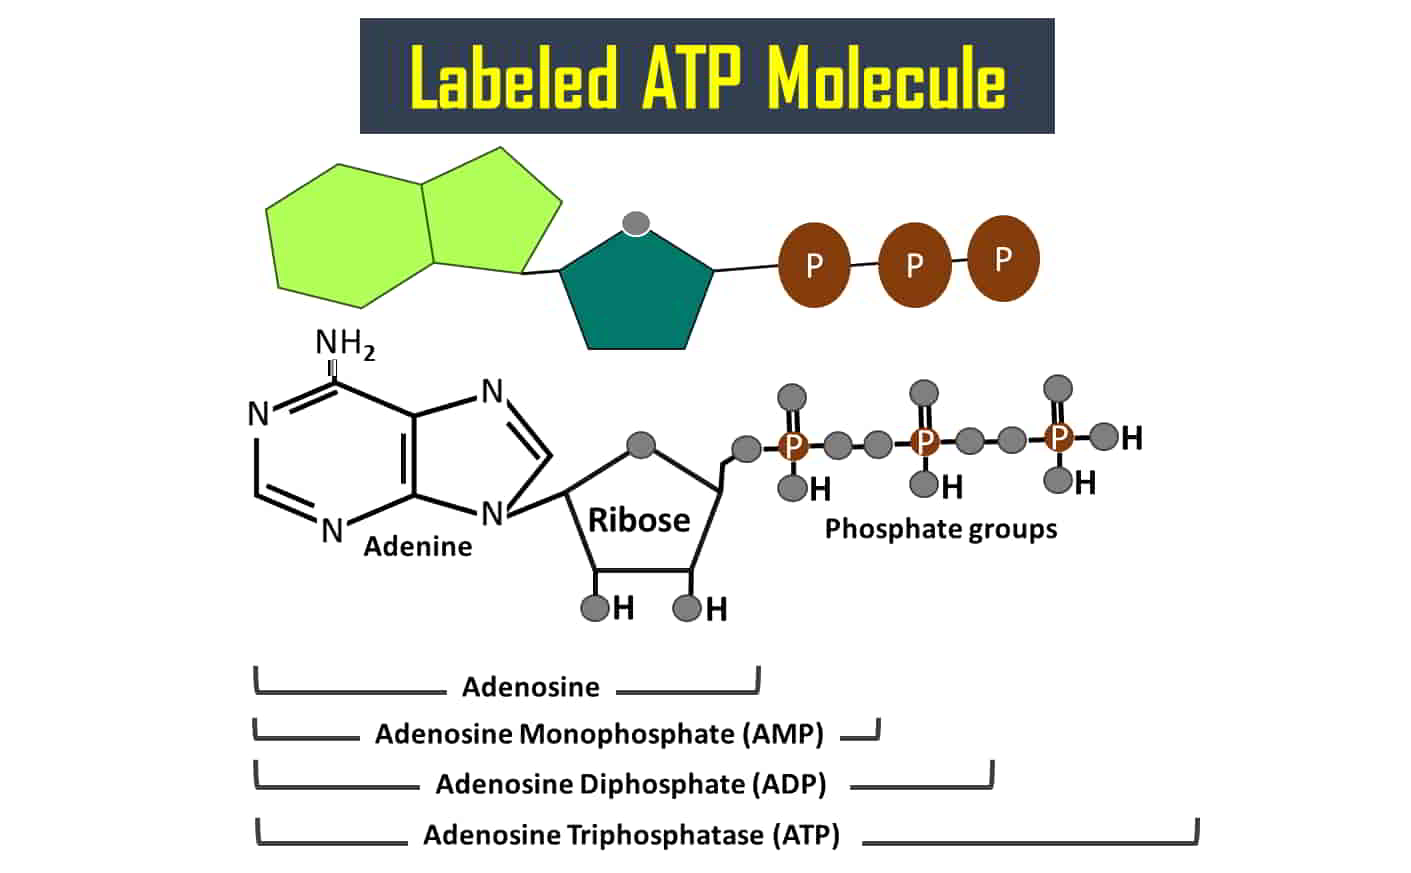 Labeled ATP Molecule structure